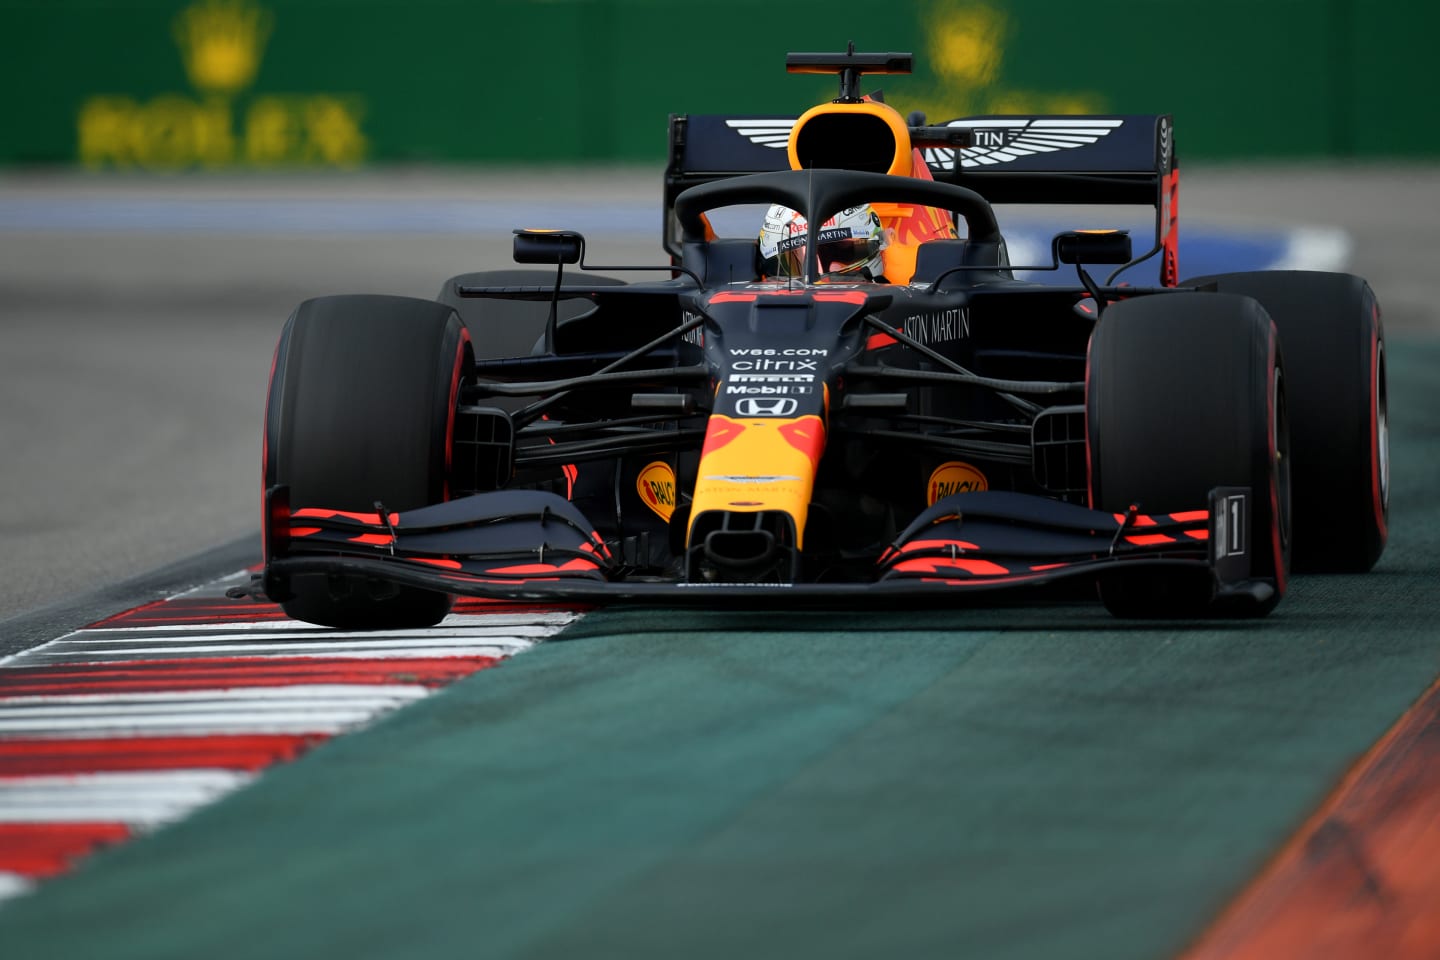 SOCHI, RUSSIA - SEPTEMBER 26: Max Verstappen of the Netherlands driving the (33) Aston Martin Red Bull Racing RB16 on track during qualifying ahead of the F1 Grand Prix of Russia at Sochi Autodrom on September 26, 2020 in Sochi, Russia. (Photo by Dan Mullan/Getty Images)